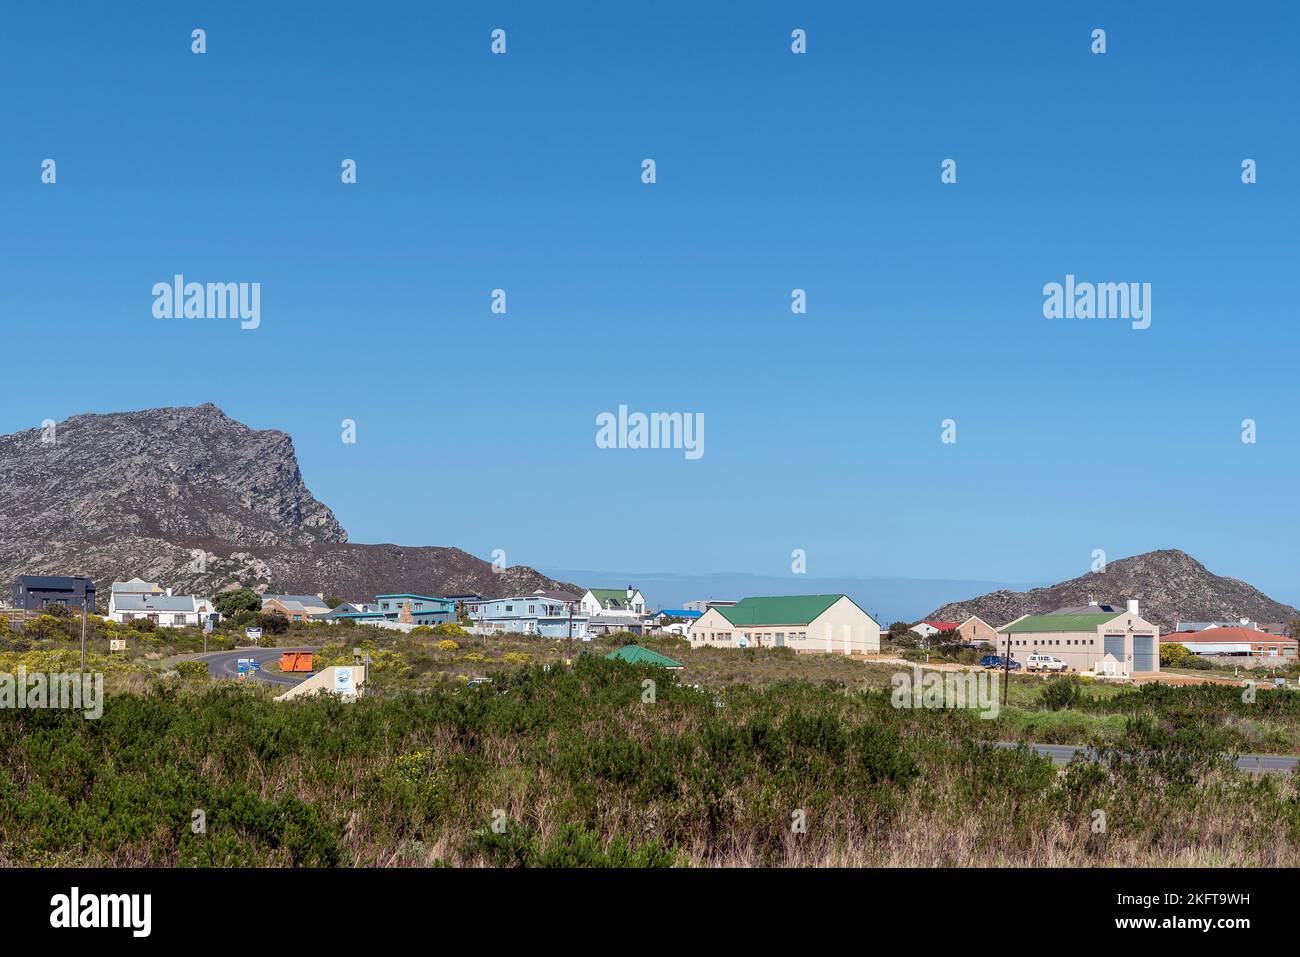 Pringlebaai, South Africa - Sep 20, 2022: View of Pringlebaai on the Western Cape South Coast. Buildings are visible Stock Photo